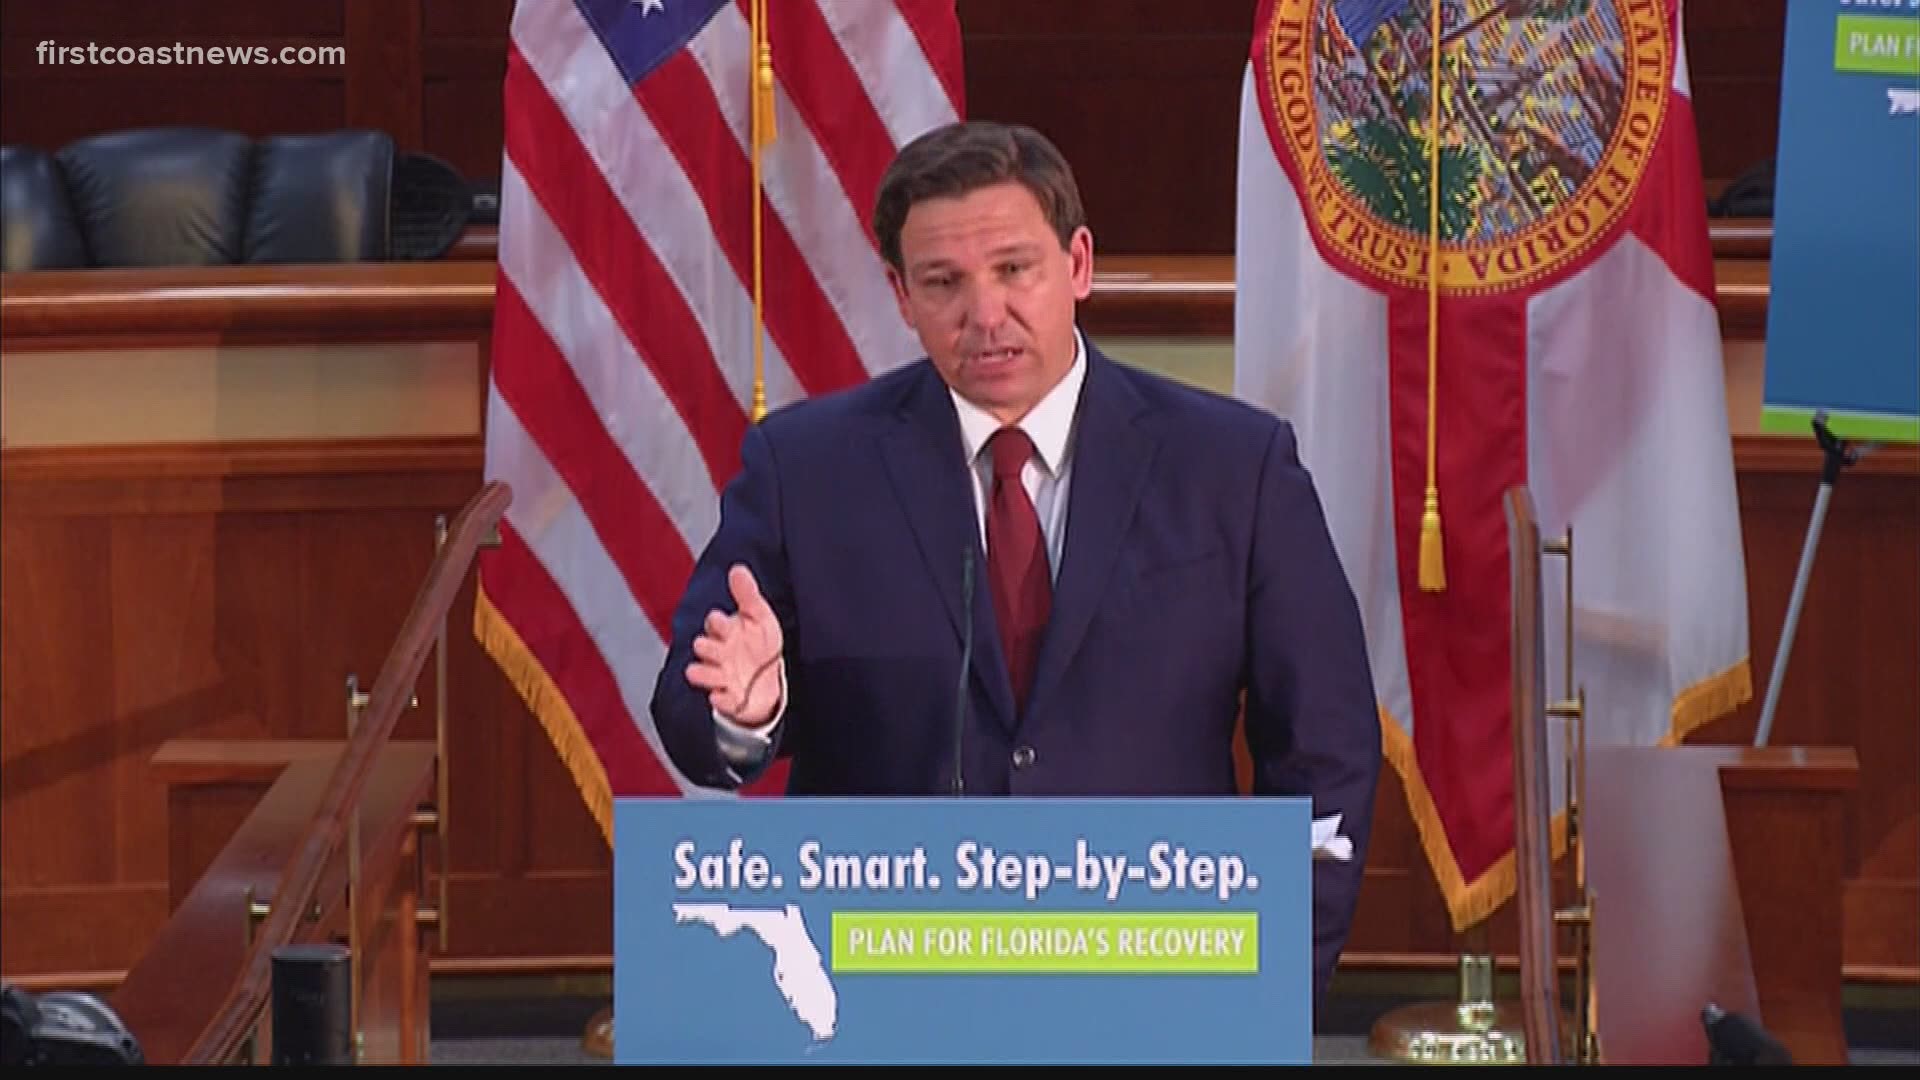 Gov. DeSantis maintained that most eligible Florida residents who filed their claims have been paid.